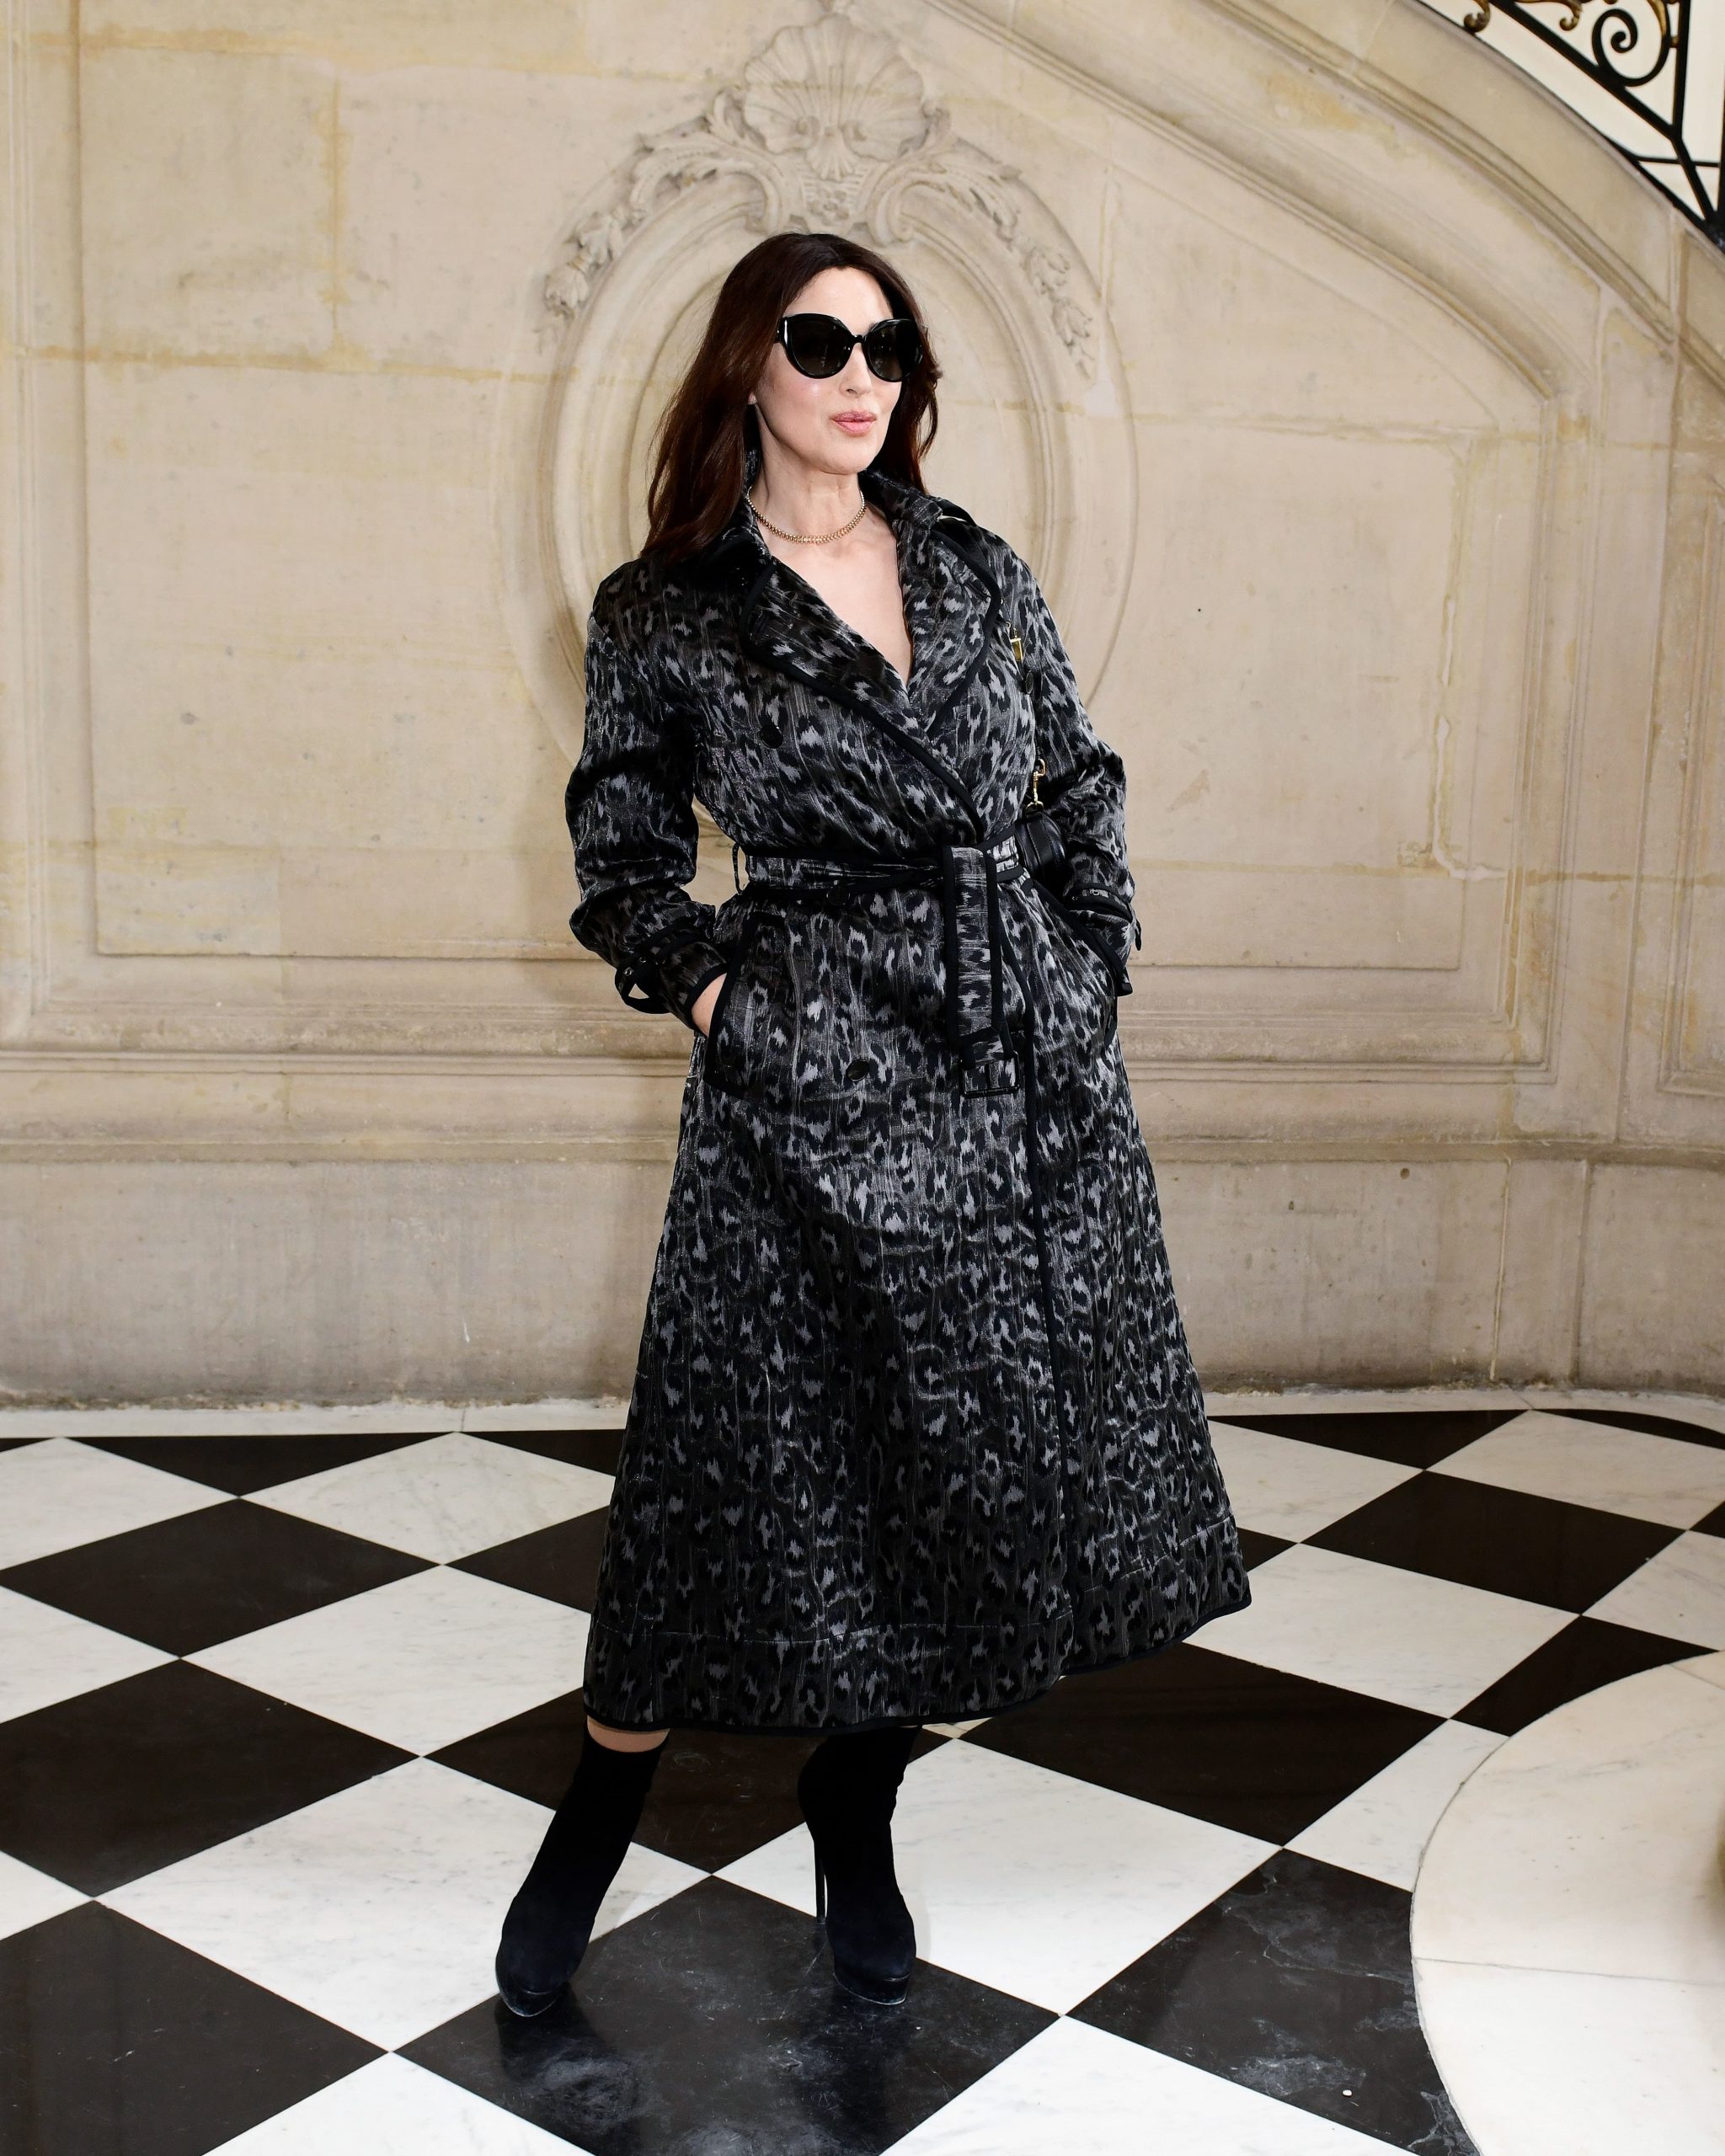 Christian Dior Fall 2021 Couture Fashion Show Front Row | The Impression